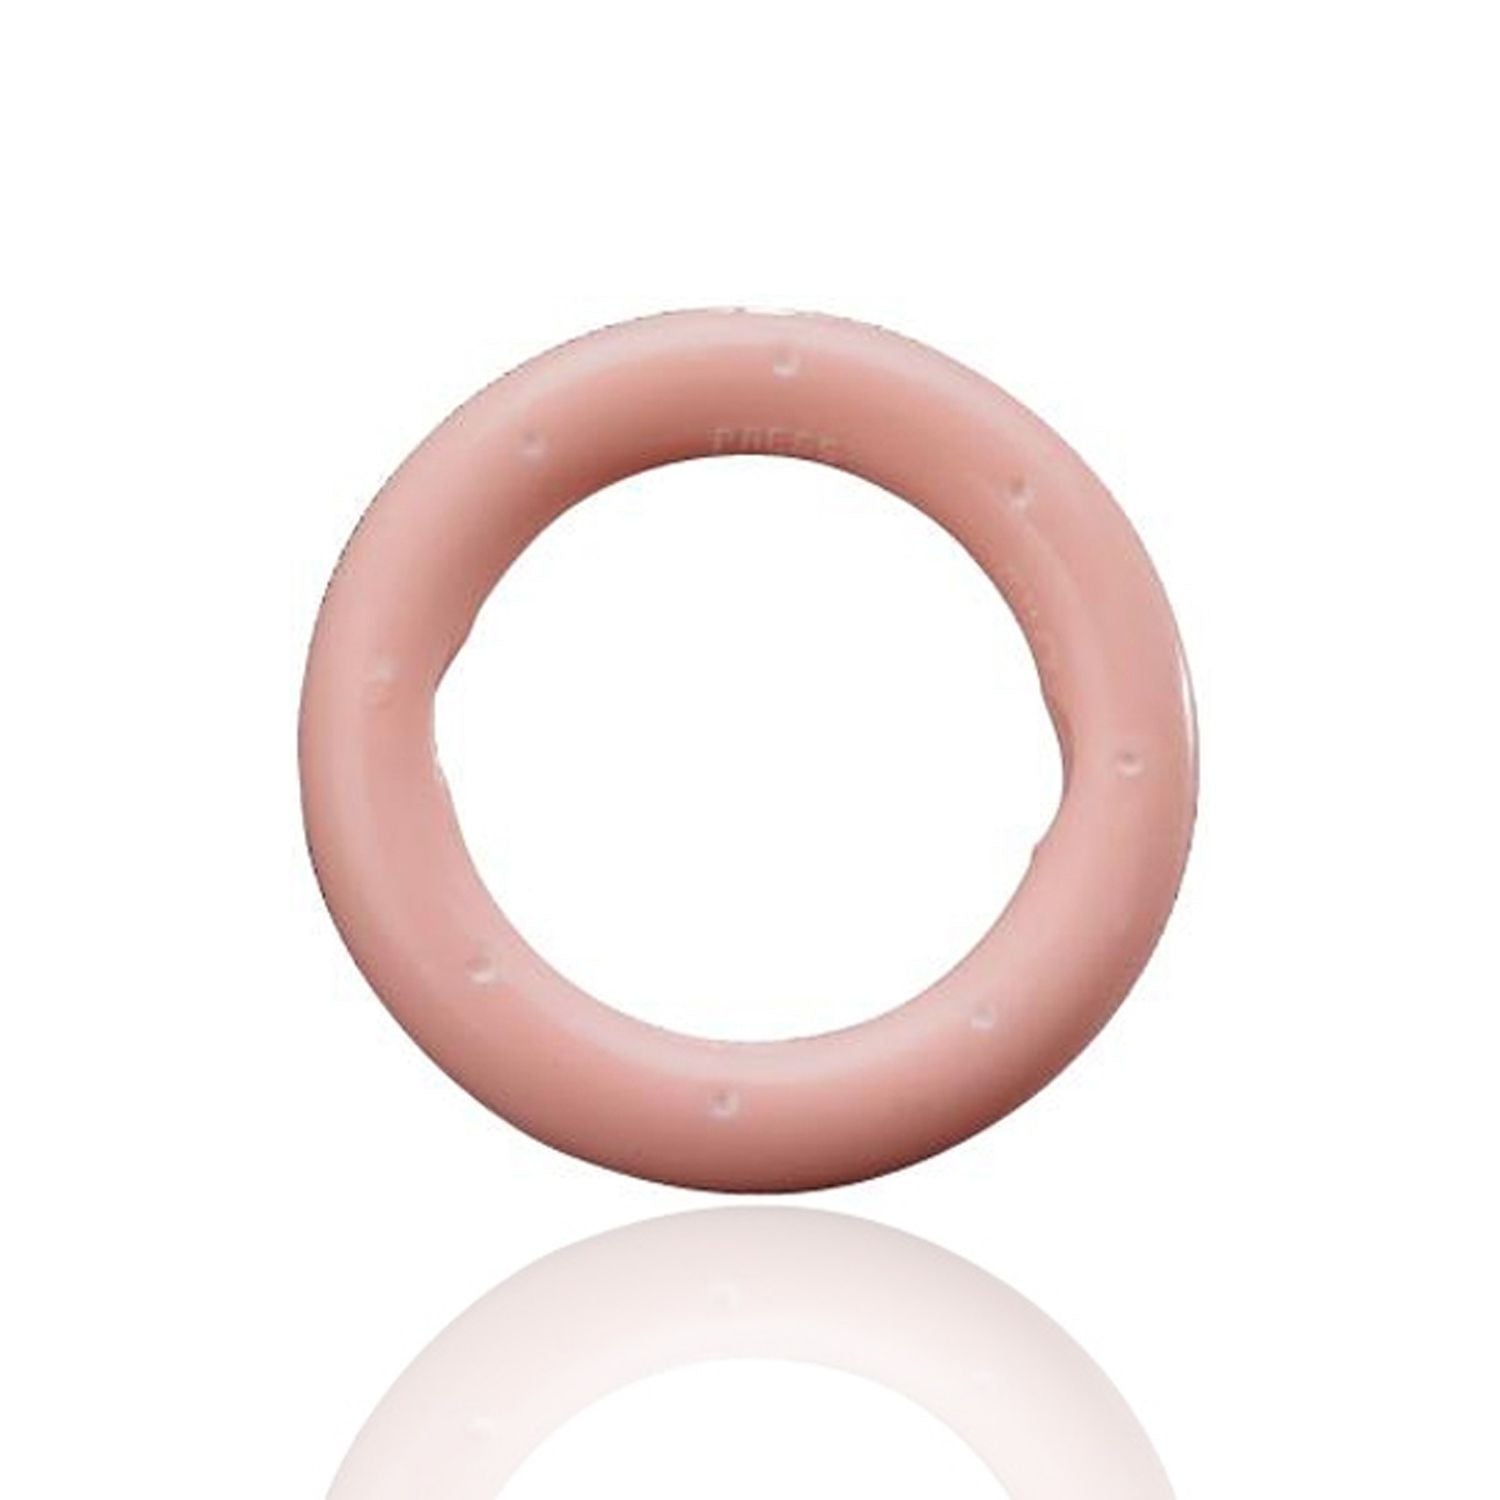 Milex Silicone Ring Pessaries | Single & Milex Silicone Ring Pessary, Folding, Size 0, 44mm o.d.